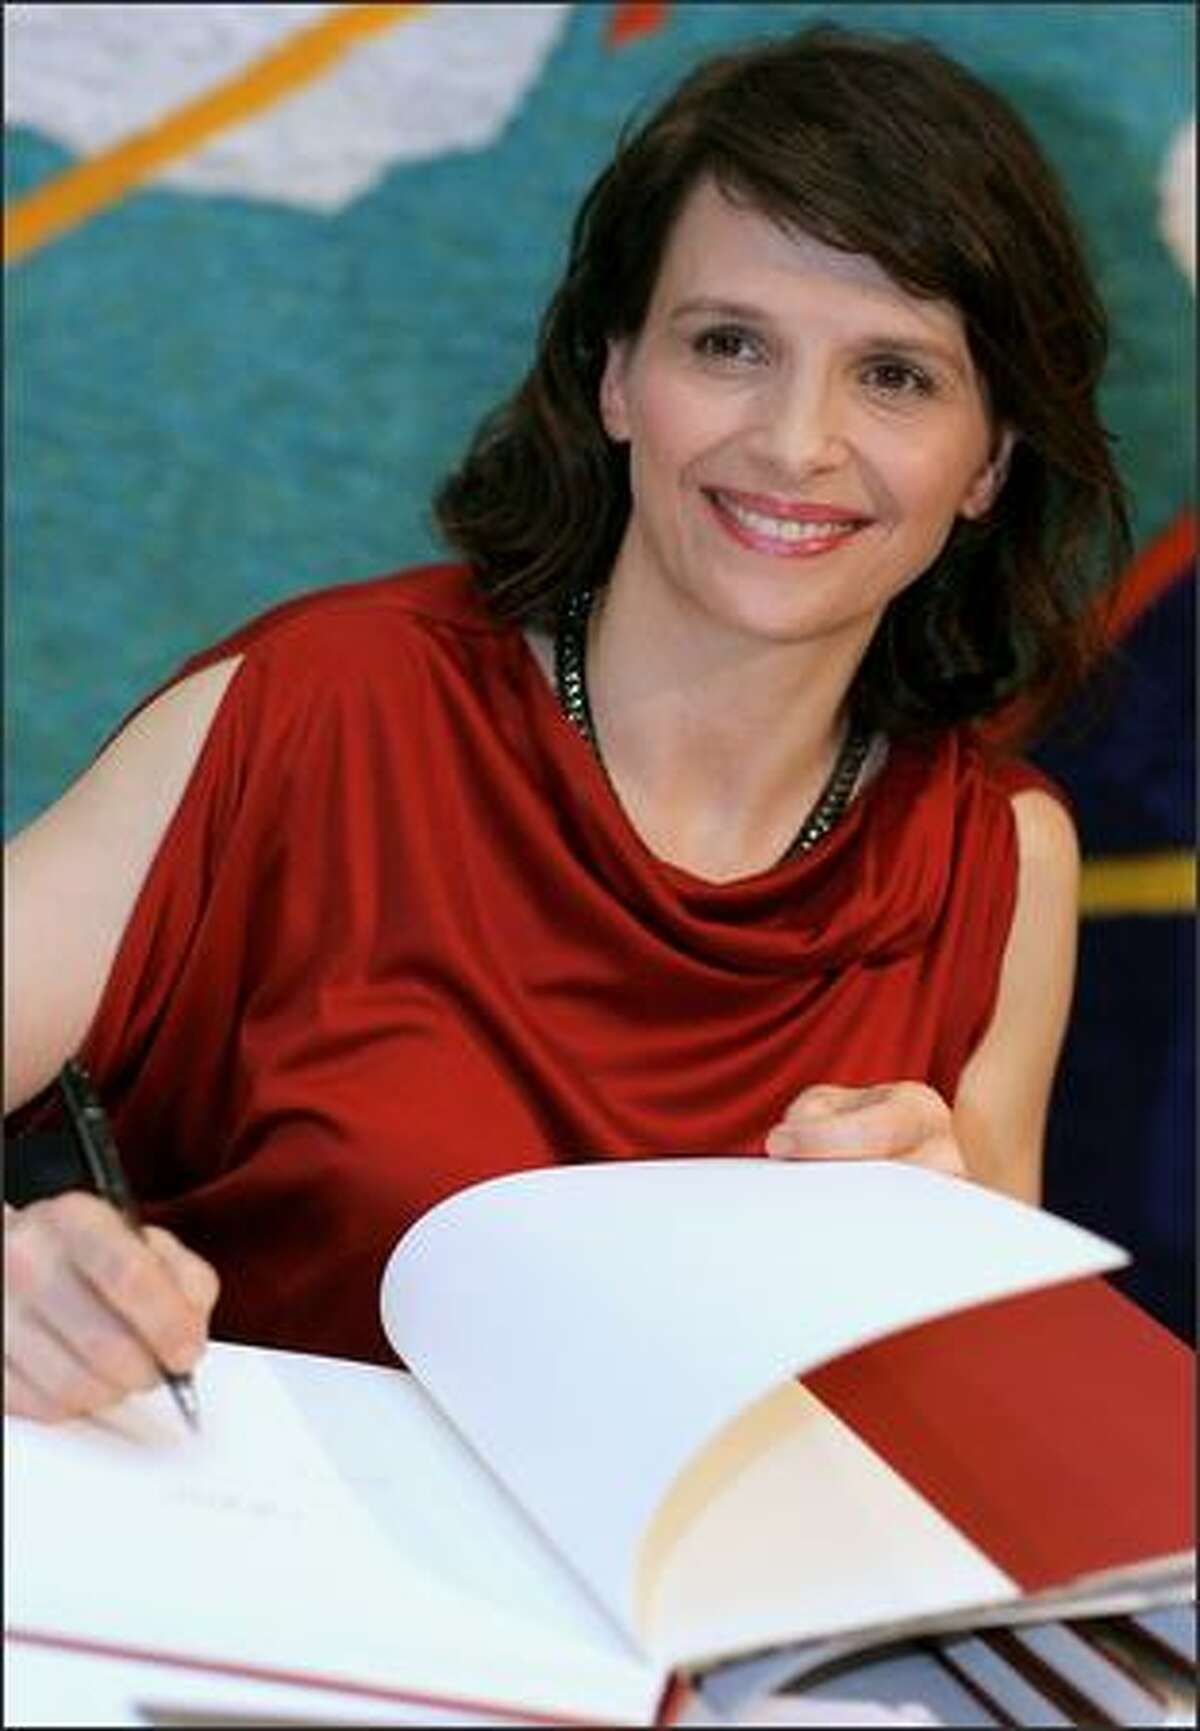 Actress Juliette Binoche signs autographs at the official launch of her latest book "Portraits - In Eyes" at the State Library of New South Wales in Sydney, Australia.